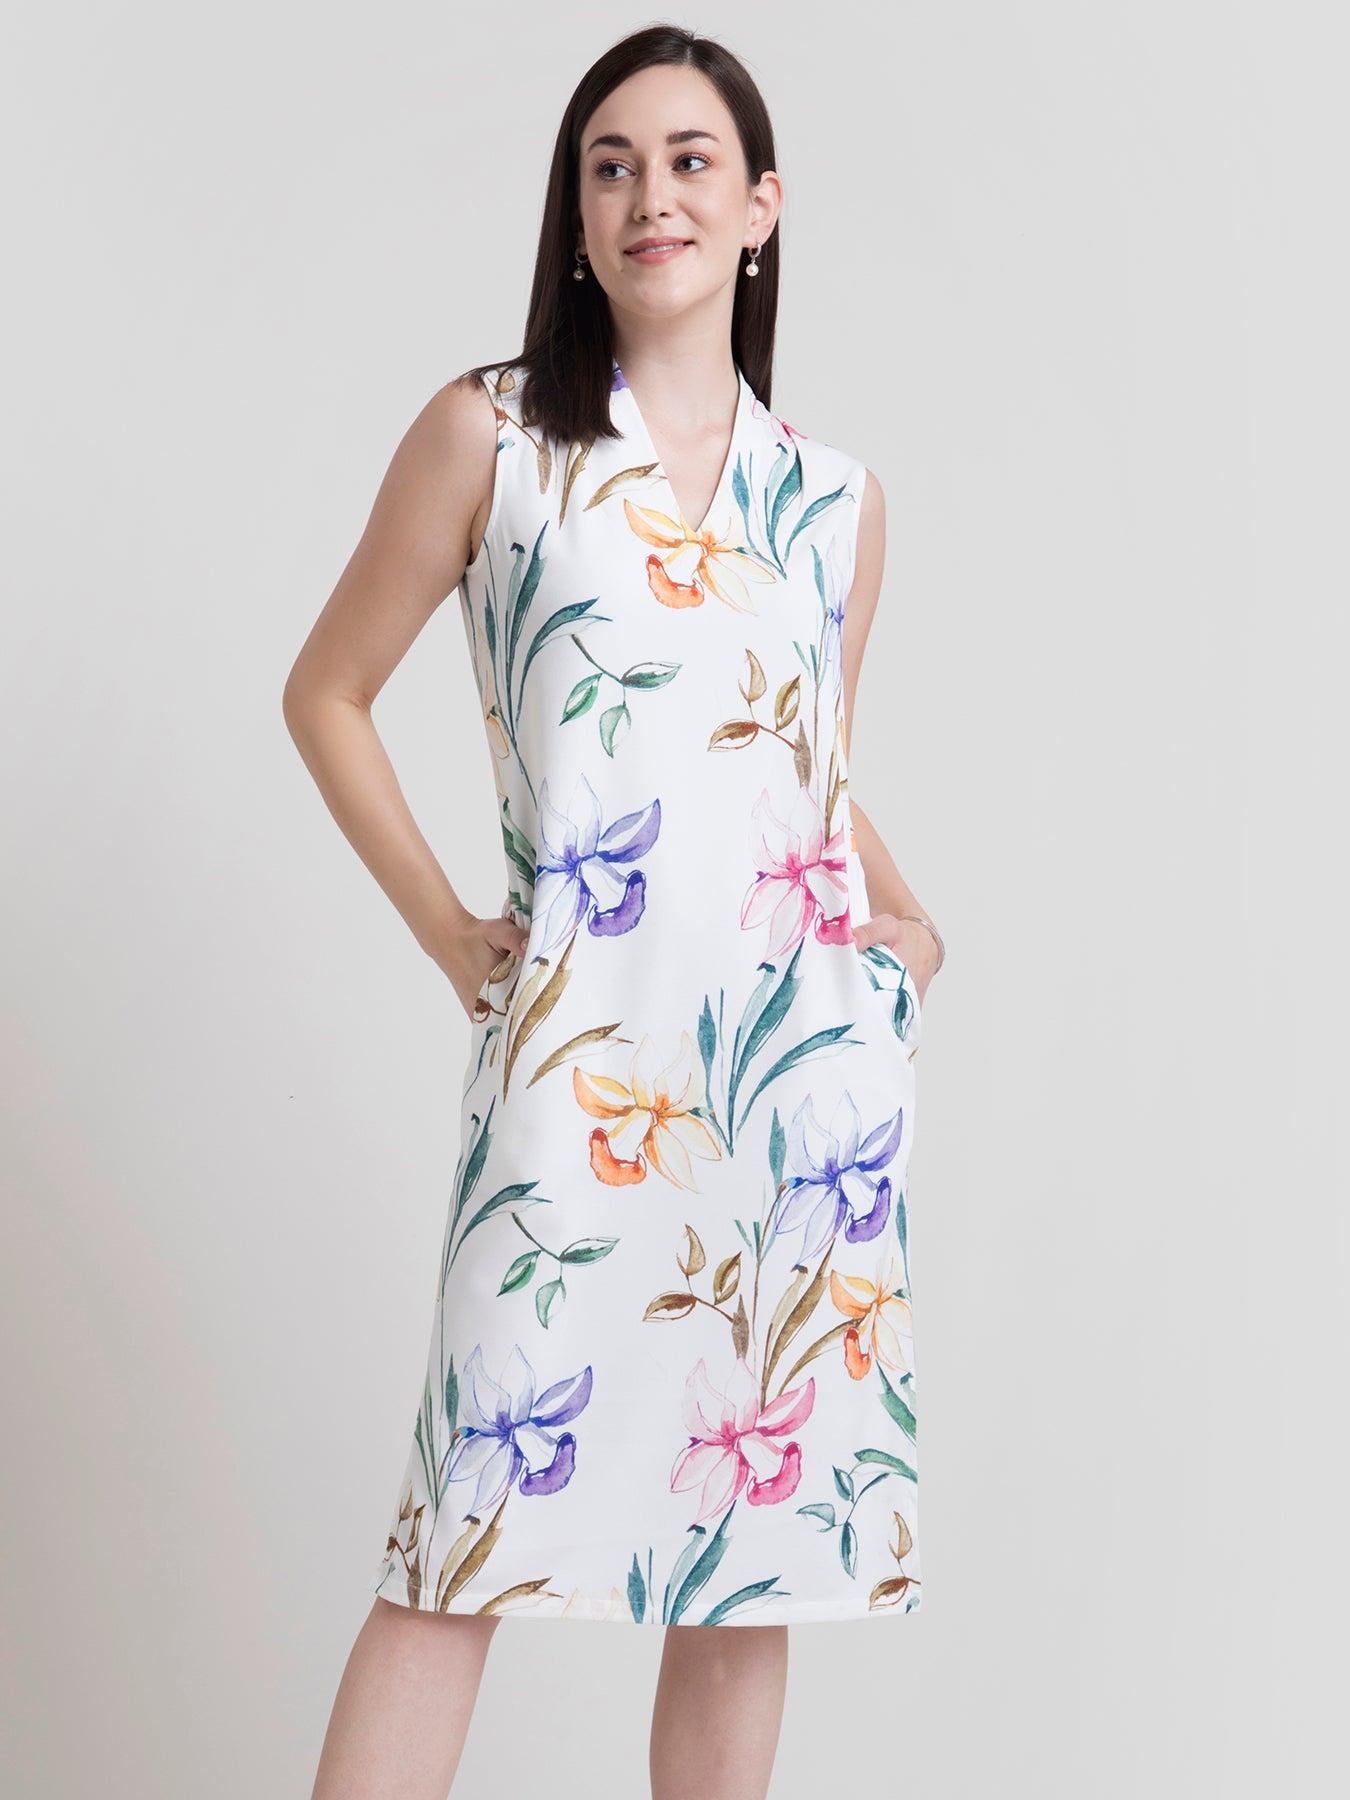 V Neck Floral Shift Dress - White and Yellow| Formal Dresses